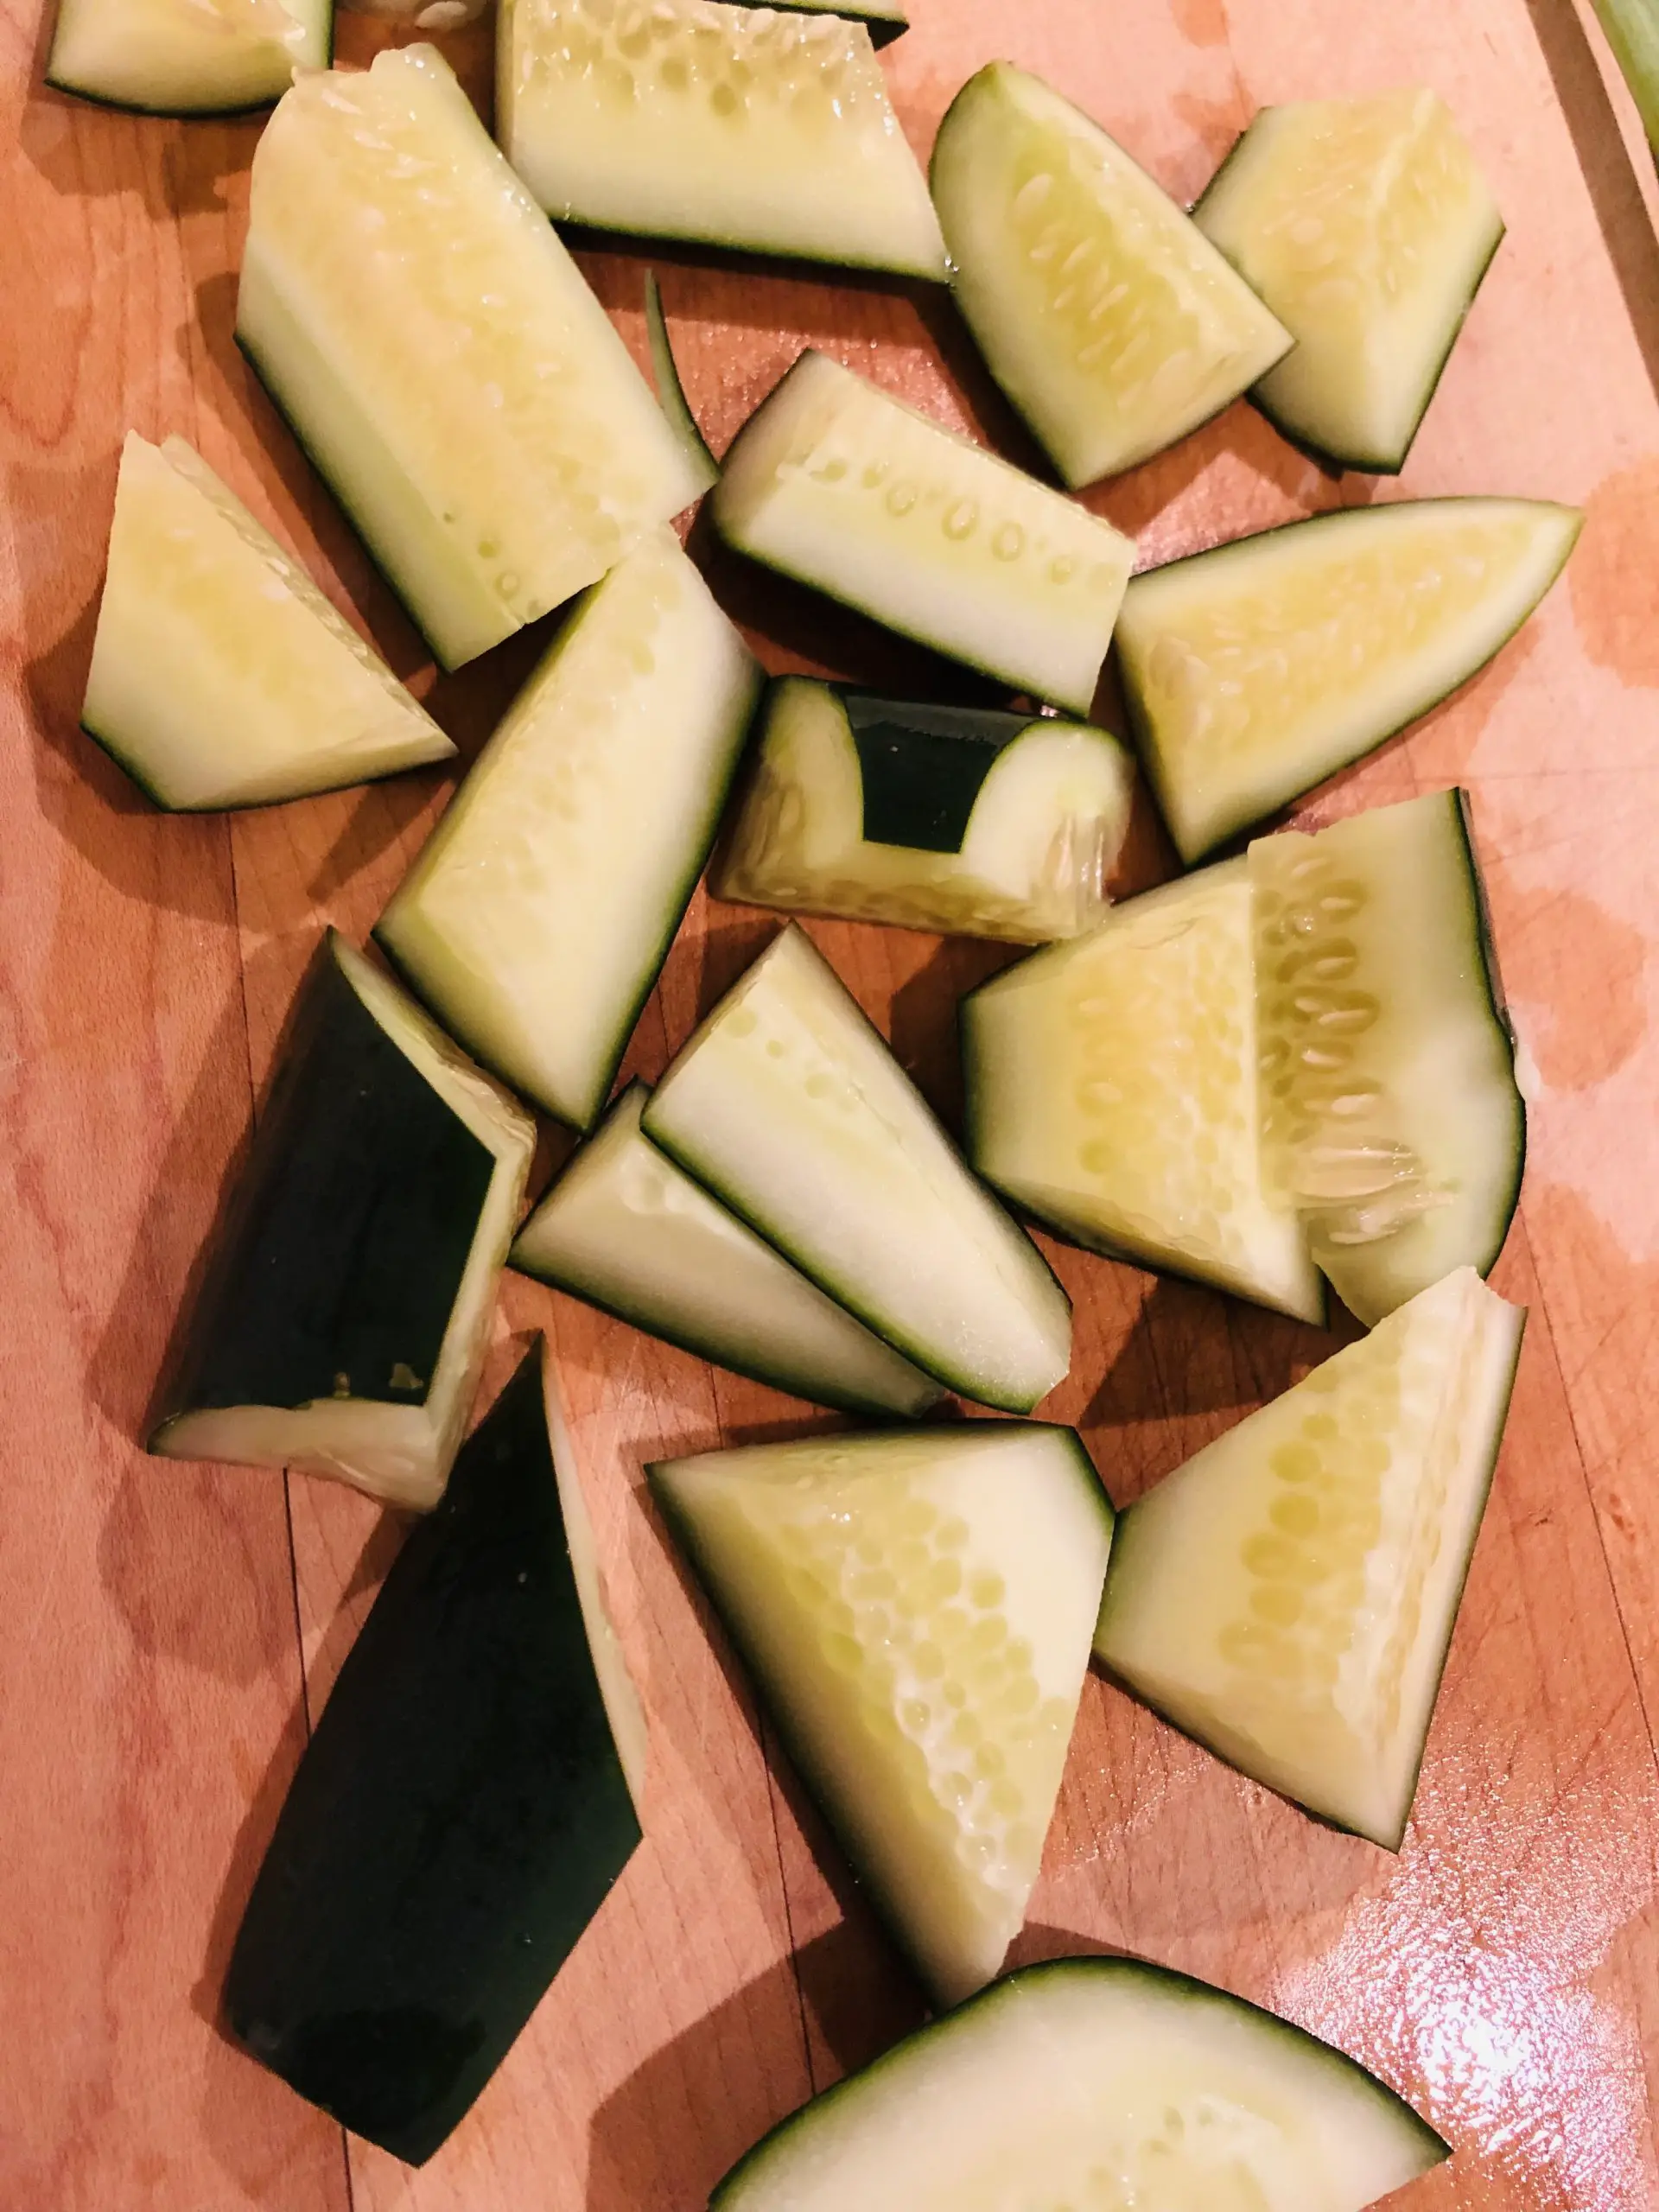 cut up pieces of cucumber on a wooden board